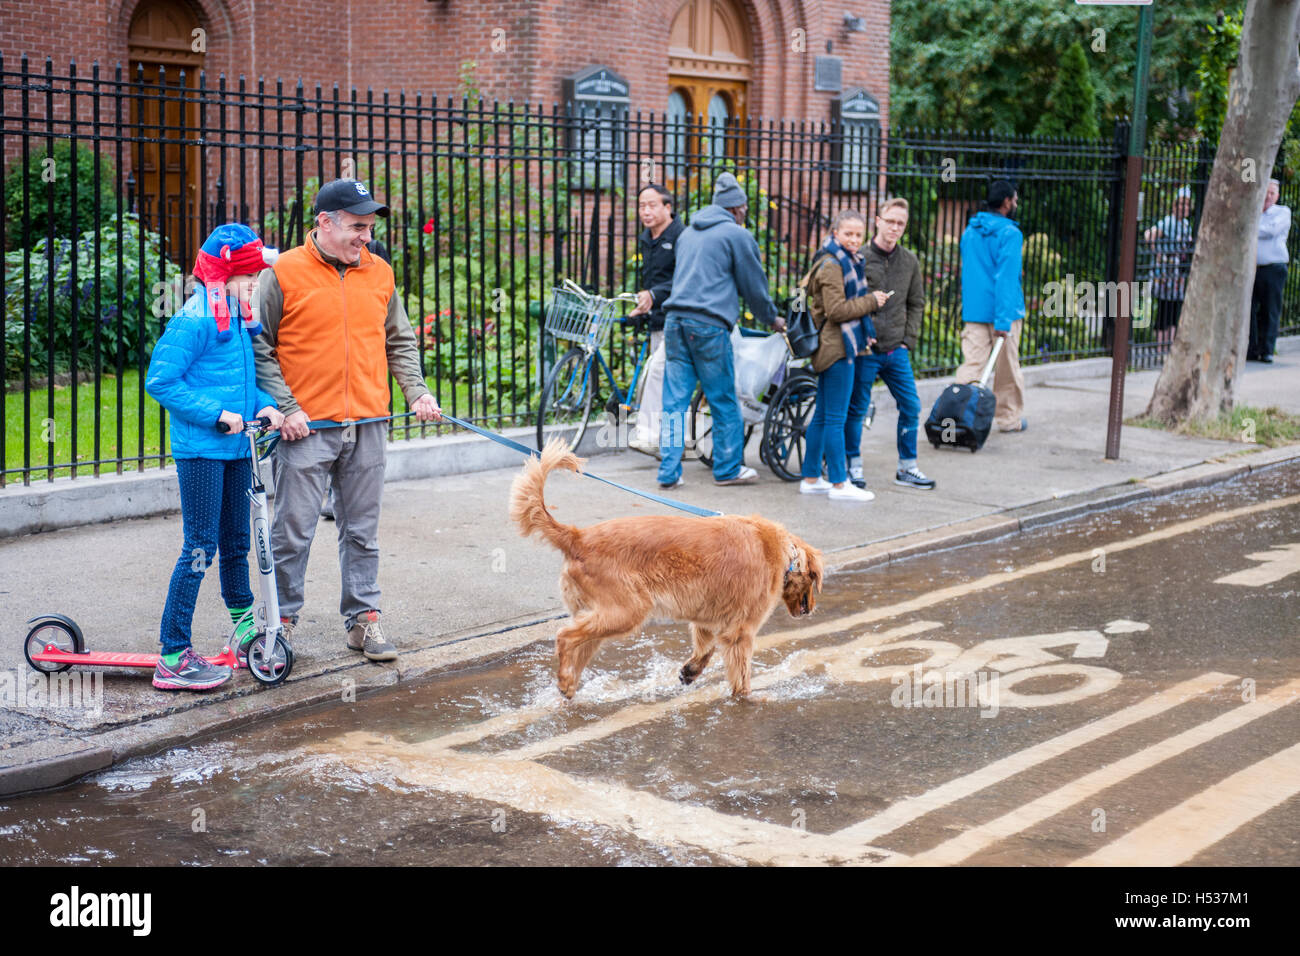 Onlookers allow their dog to play in the flowing water from a watermain break  in the Chelsea neighborhood of New York on Wednesday, October 12, 2016. The watermain break caused water to gush but it was mostly contained to the street safely running into storm drains. (© Richard B. Levine) Stock Photo